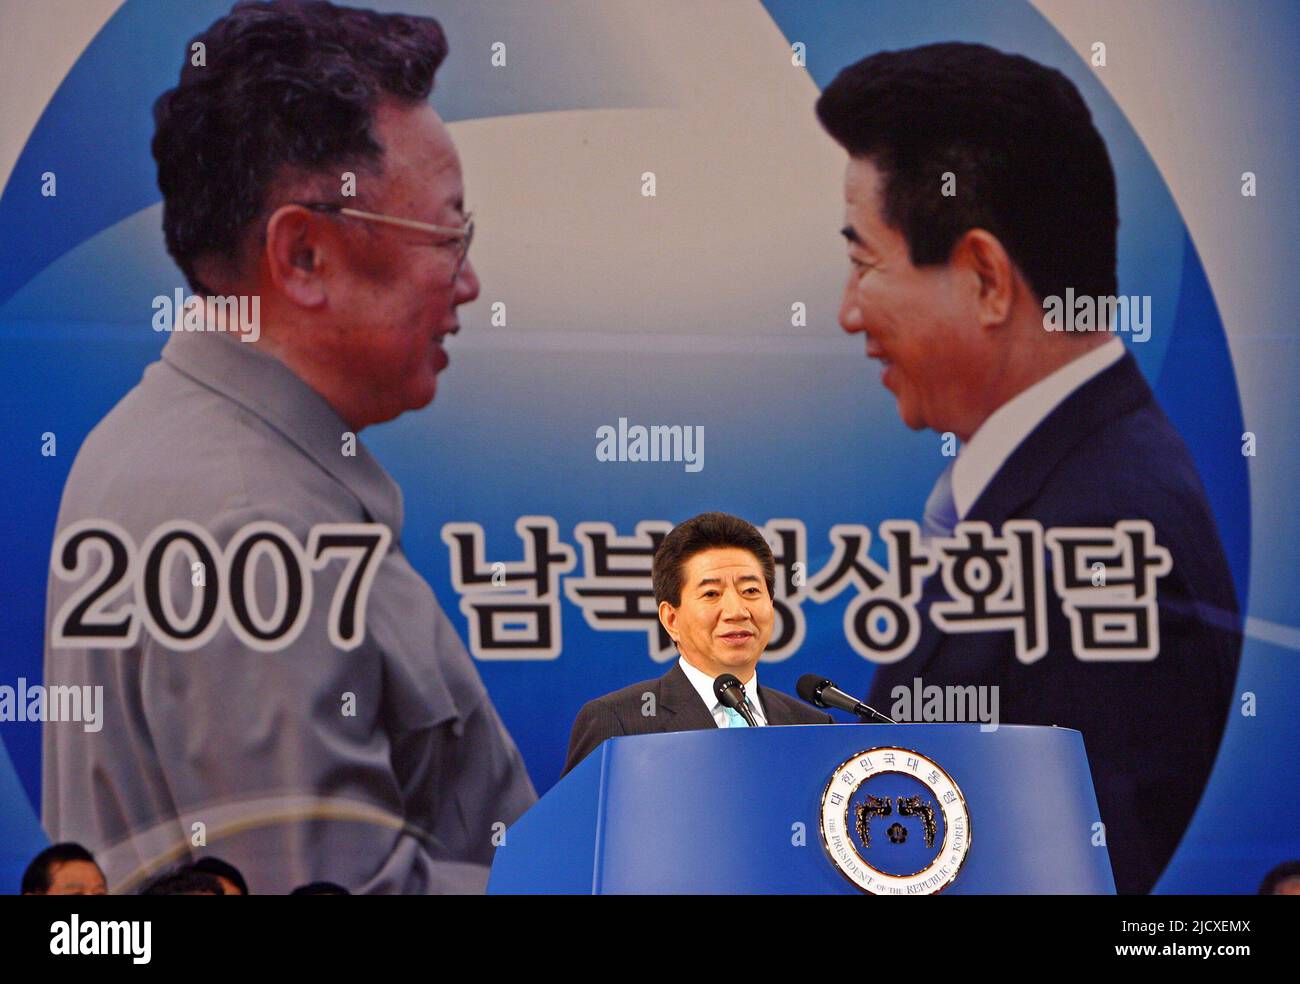 South Korean President Roh Moo-hyun speaks after returning from North Korea during welcoming ceremony at Paju near the border village of the Panmunom, north of Seoul, South Korea, Thursday, Oct. 4, 2007. The leaders of North and South Korea signed a wide-ranging reconciliation pact Thursday pledging to finally seek a peace treaty to replace the 54-year-old cease-fire that ended the Korean War. The letters on the background read ' 2007 South and North Korea summit meeting.' Stock Photo